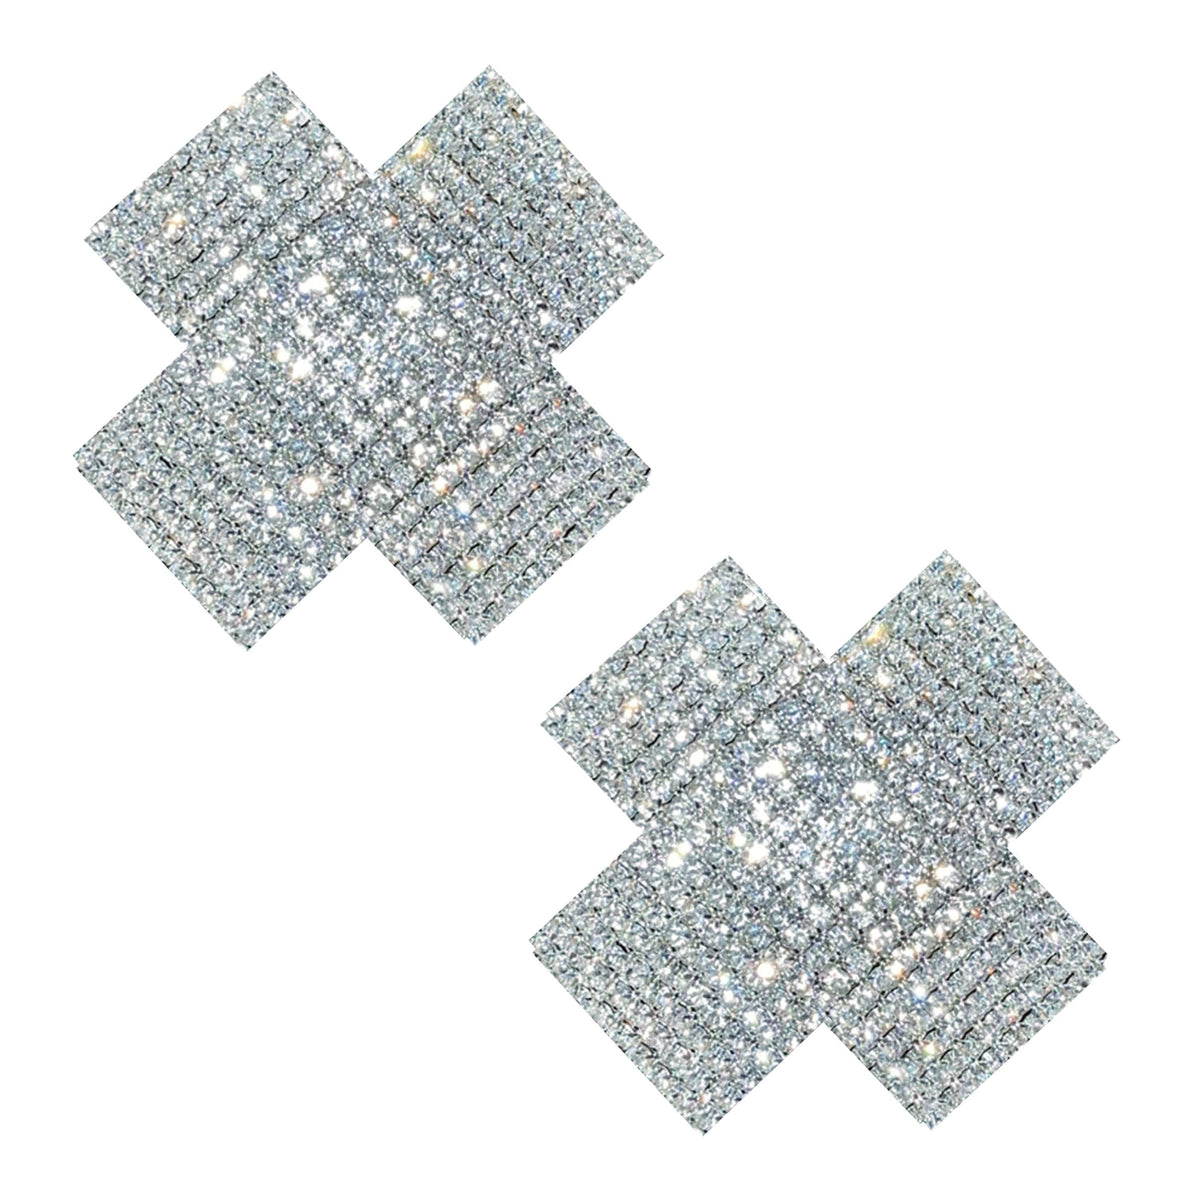 X Marks the Spot Crystal Jewel Reusable Silicone Pasties